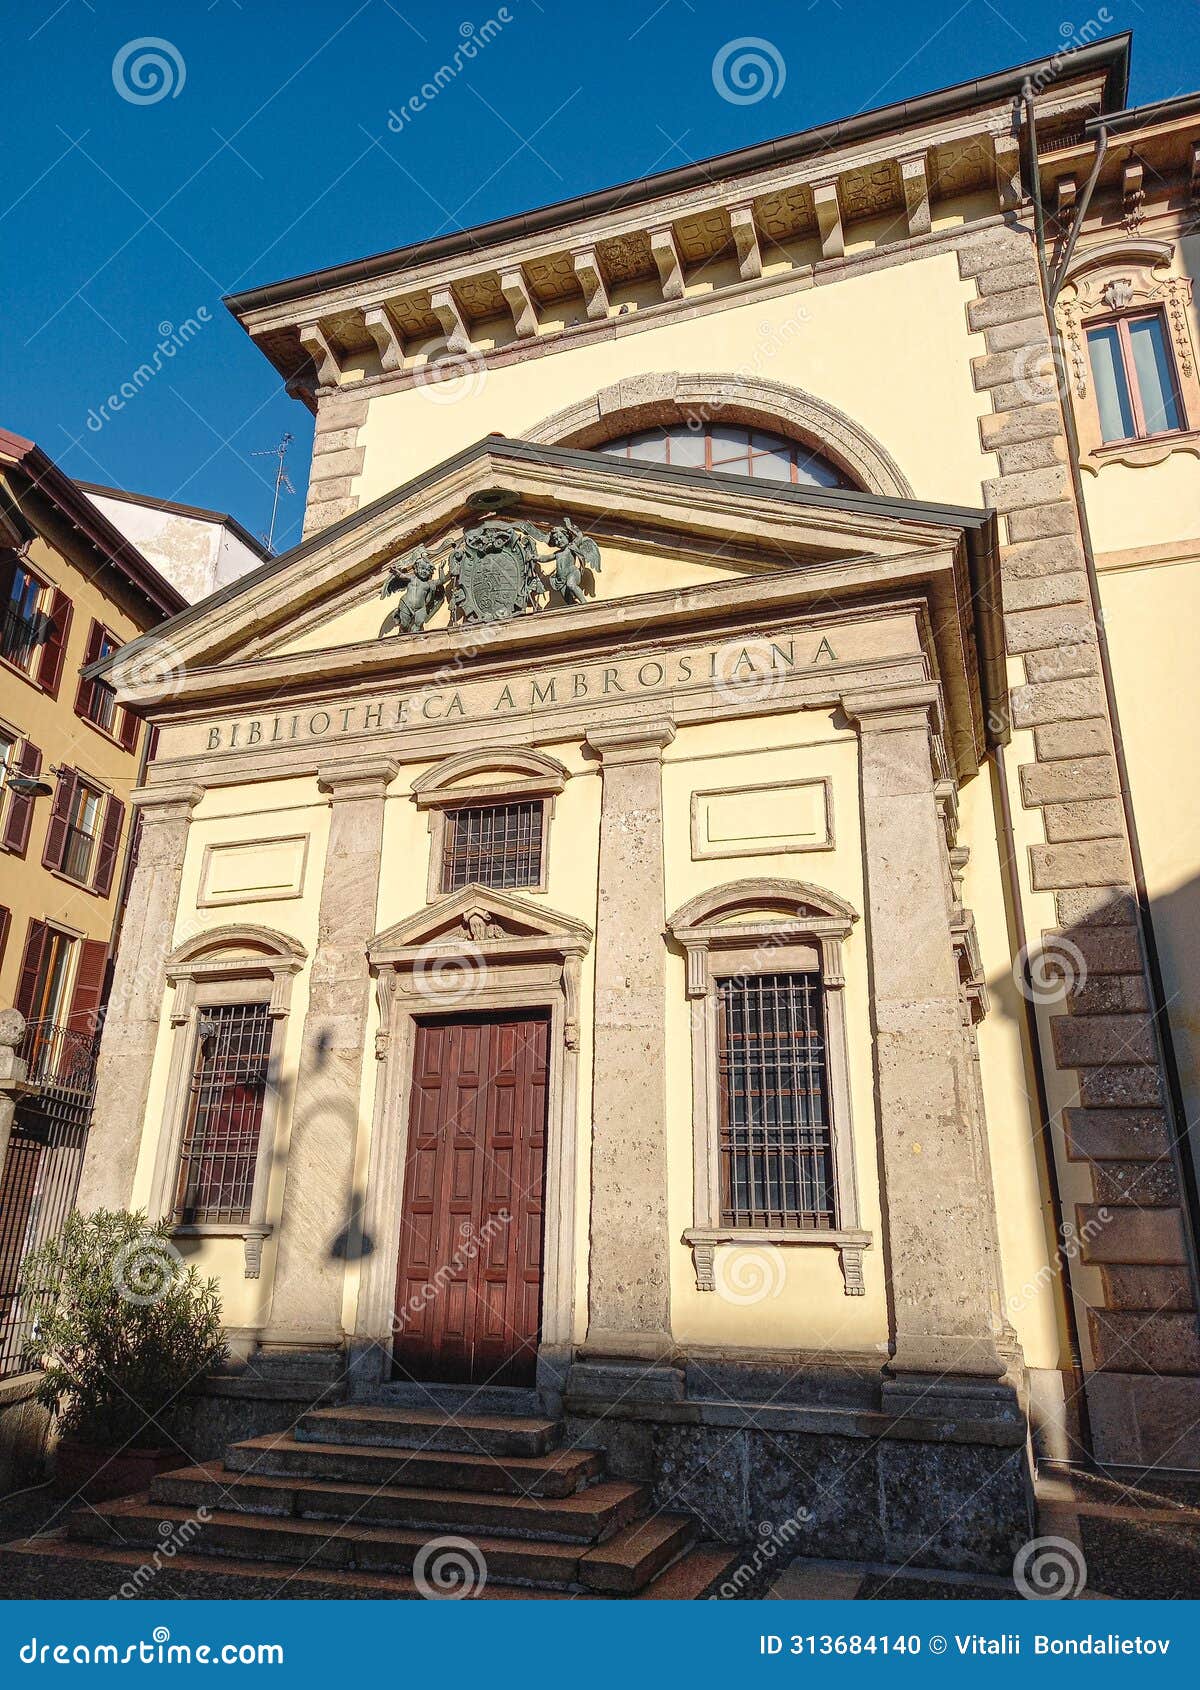 the biblioteca ambrosiana is a historic library in milan